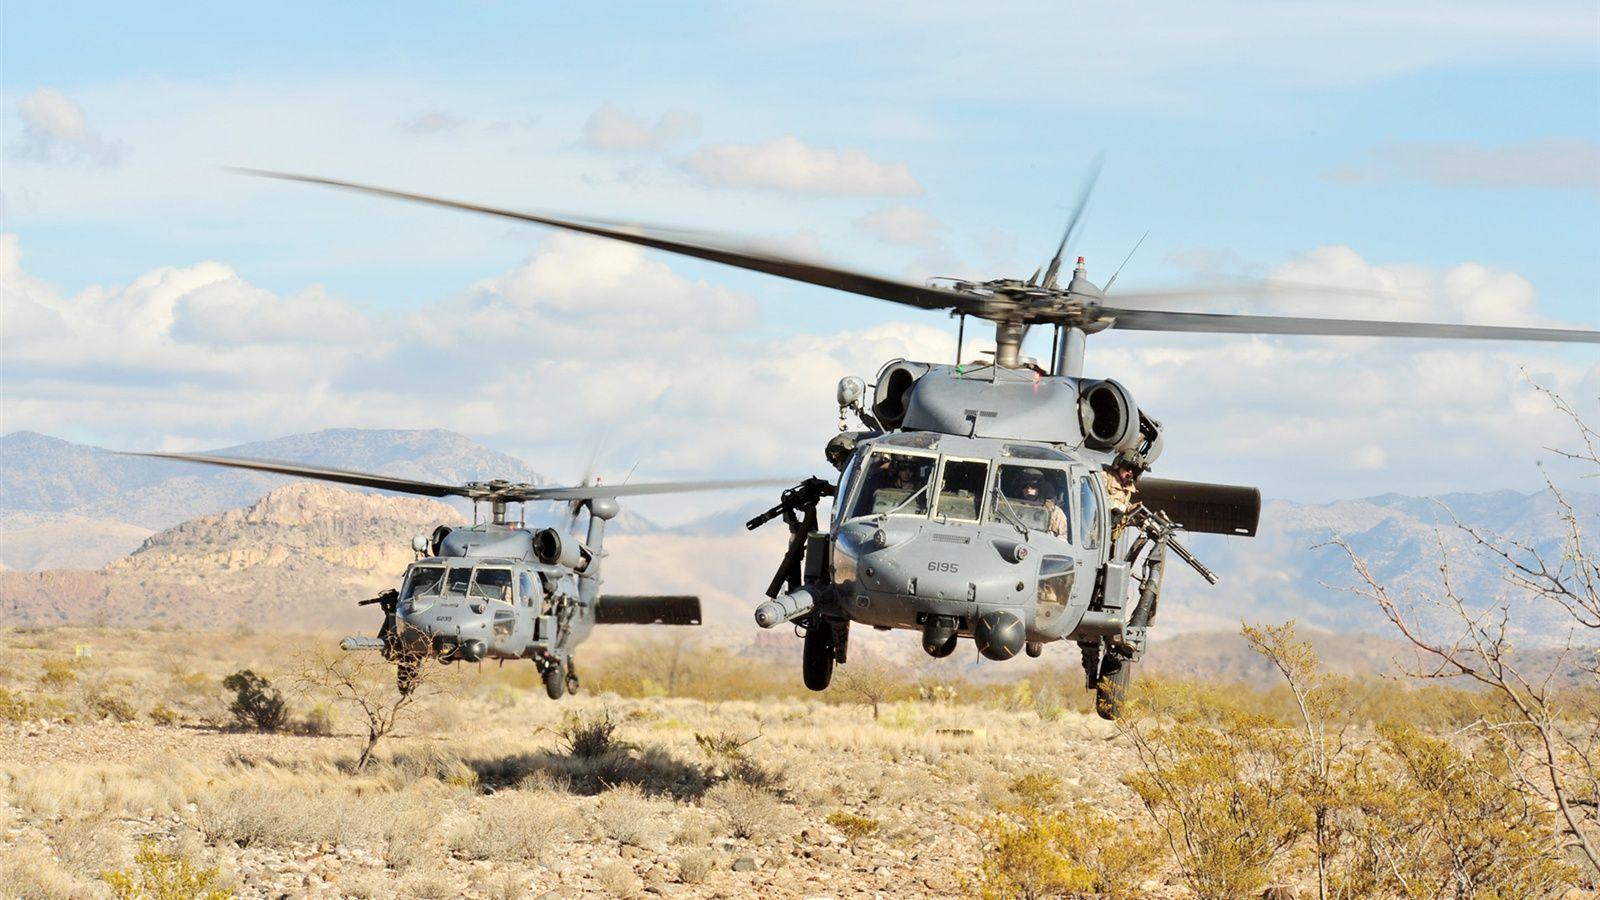 Ten helicopters that changed history